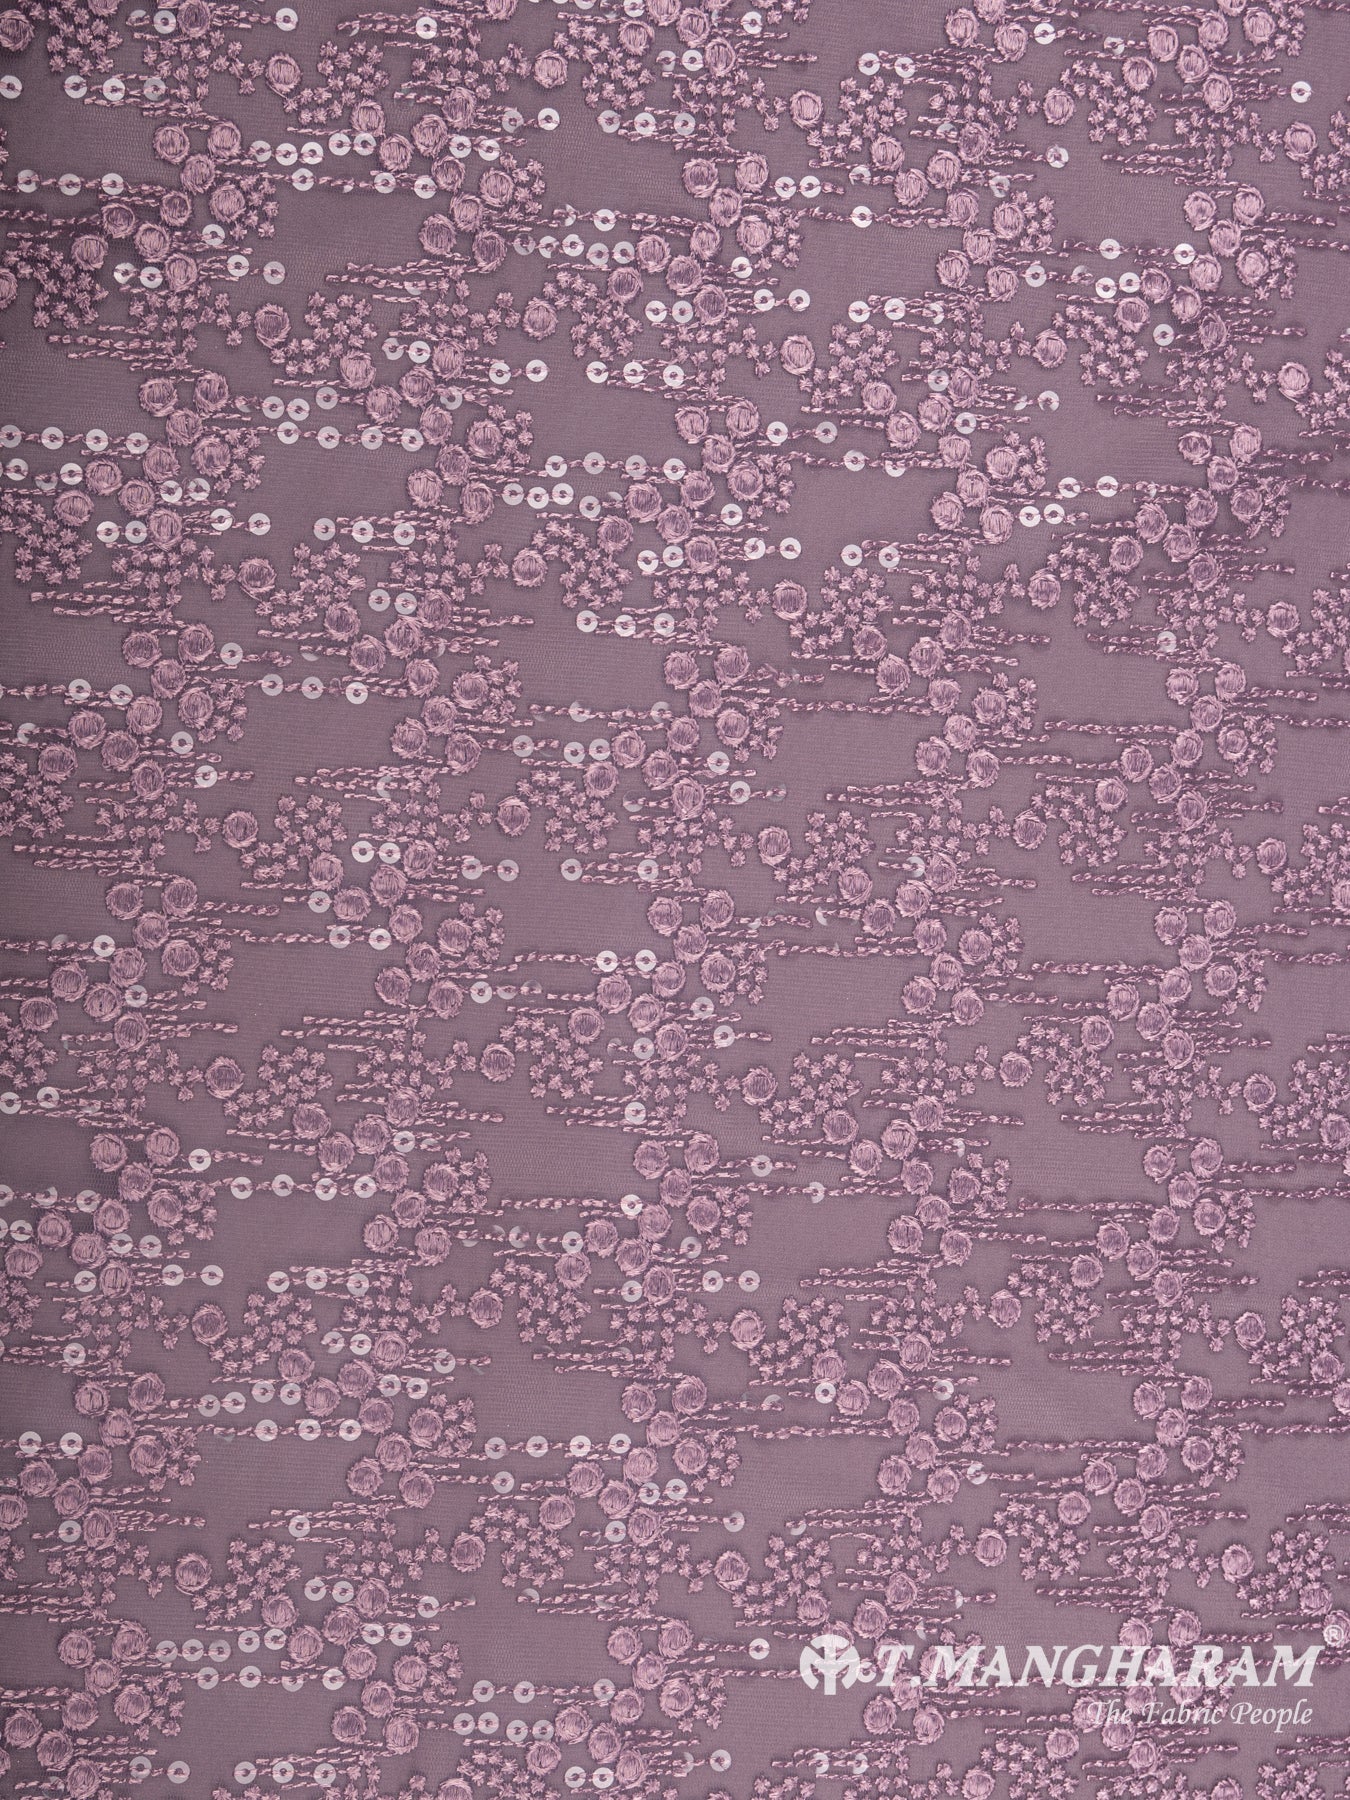 Violet Net Embroidery Fabric - EB4891 view-3